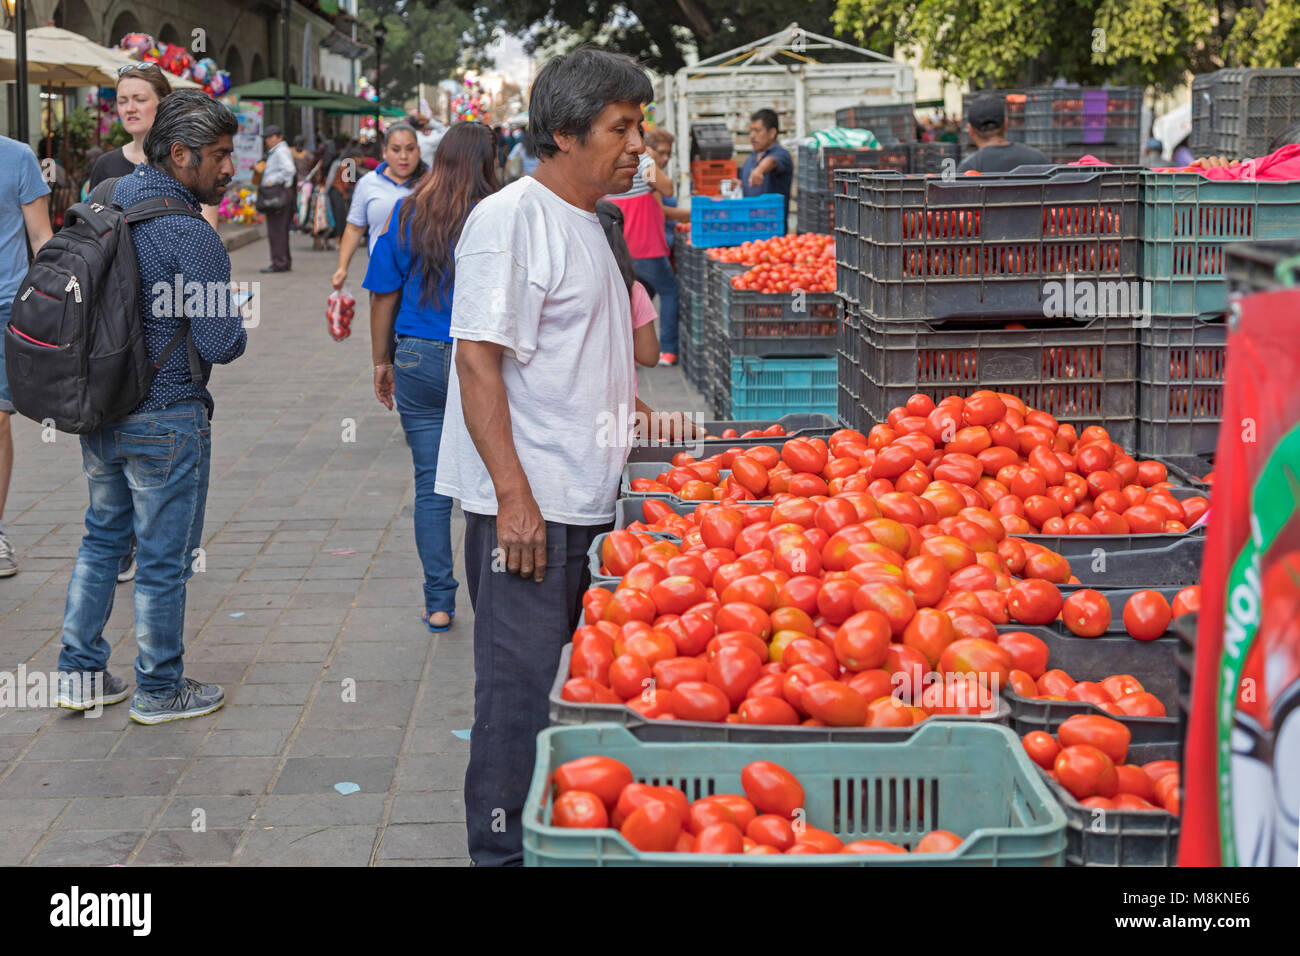 Oaxaca, Oax., Mexico - Independent tomato farmers sell tomatoes in the zocalo (central square). Stock Photo